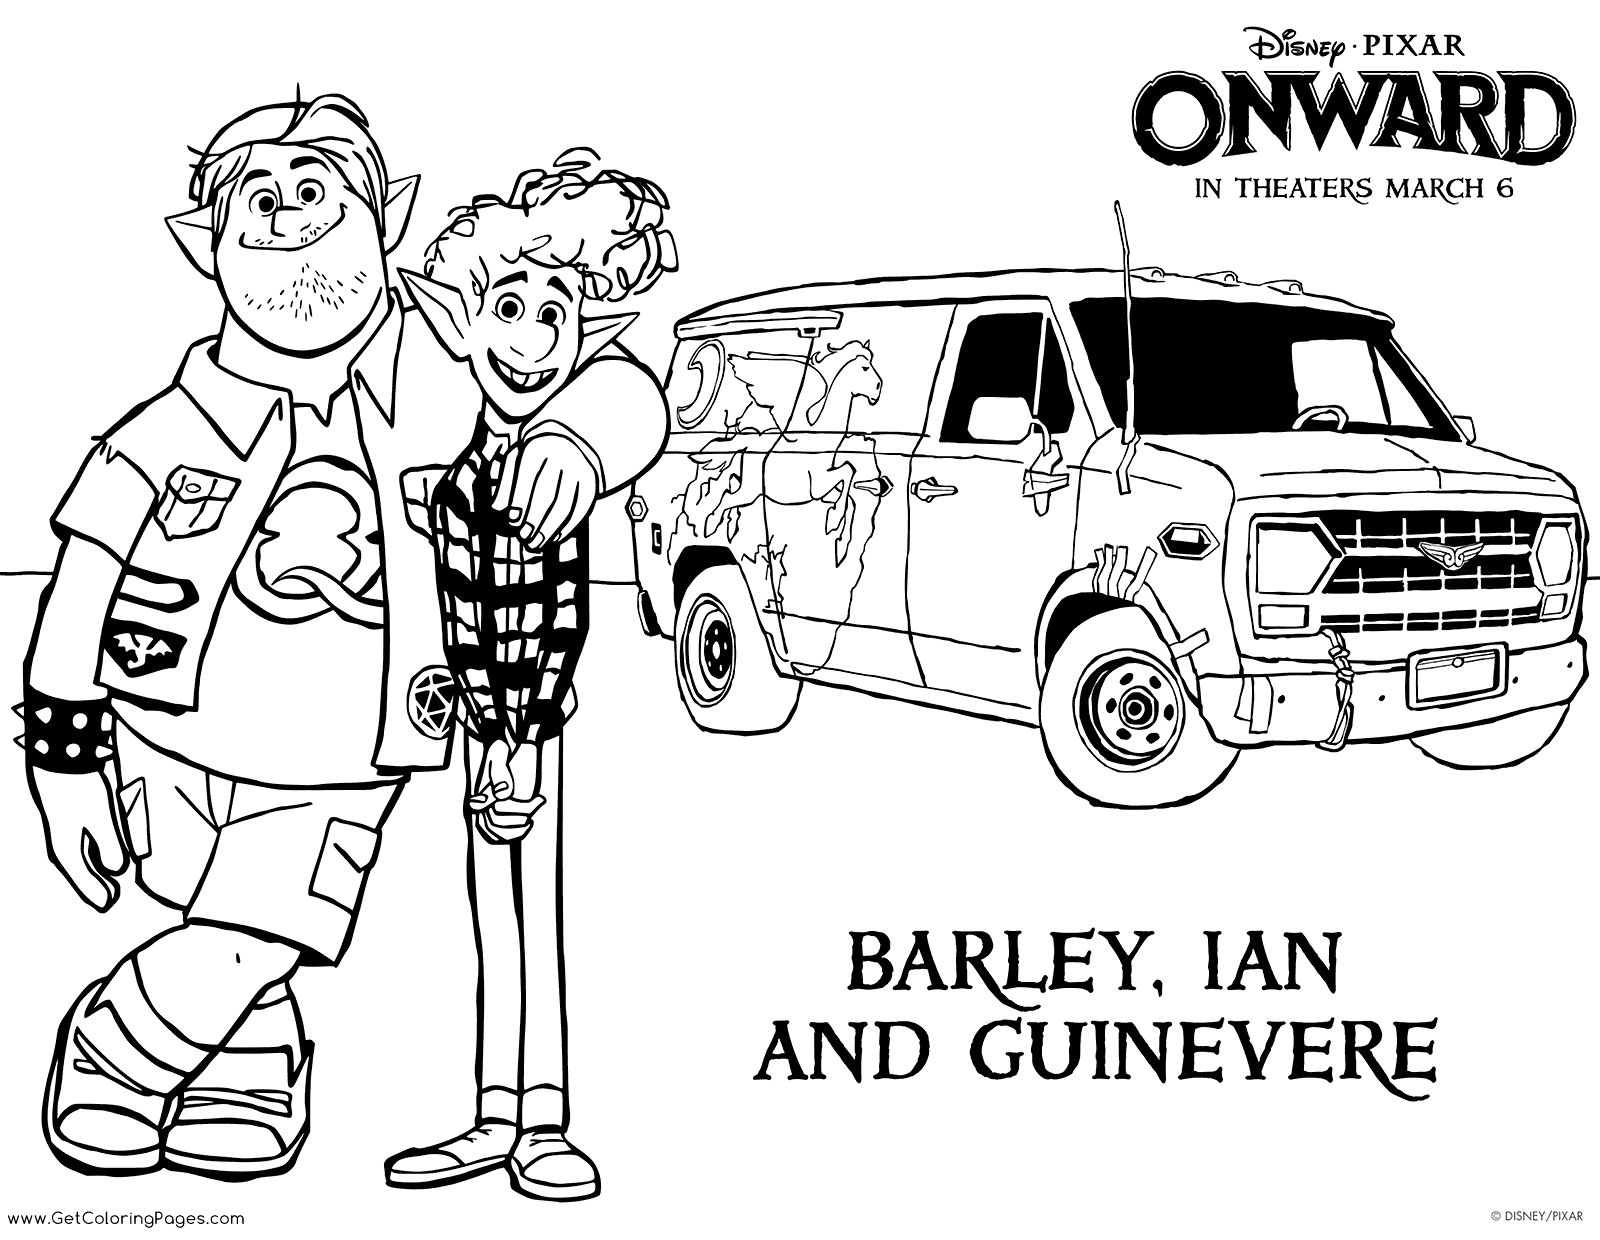 Barley, Ian and Guinevere Coloring Page